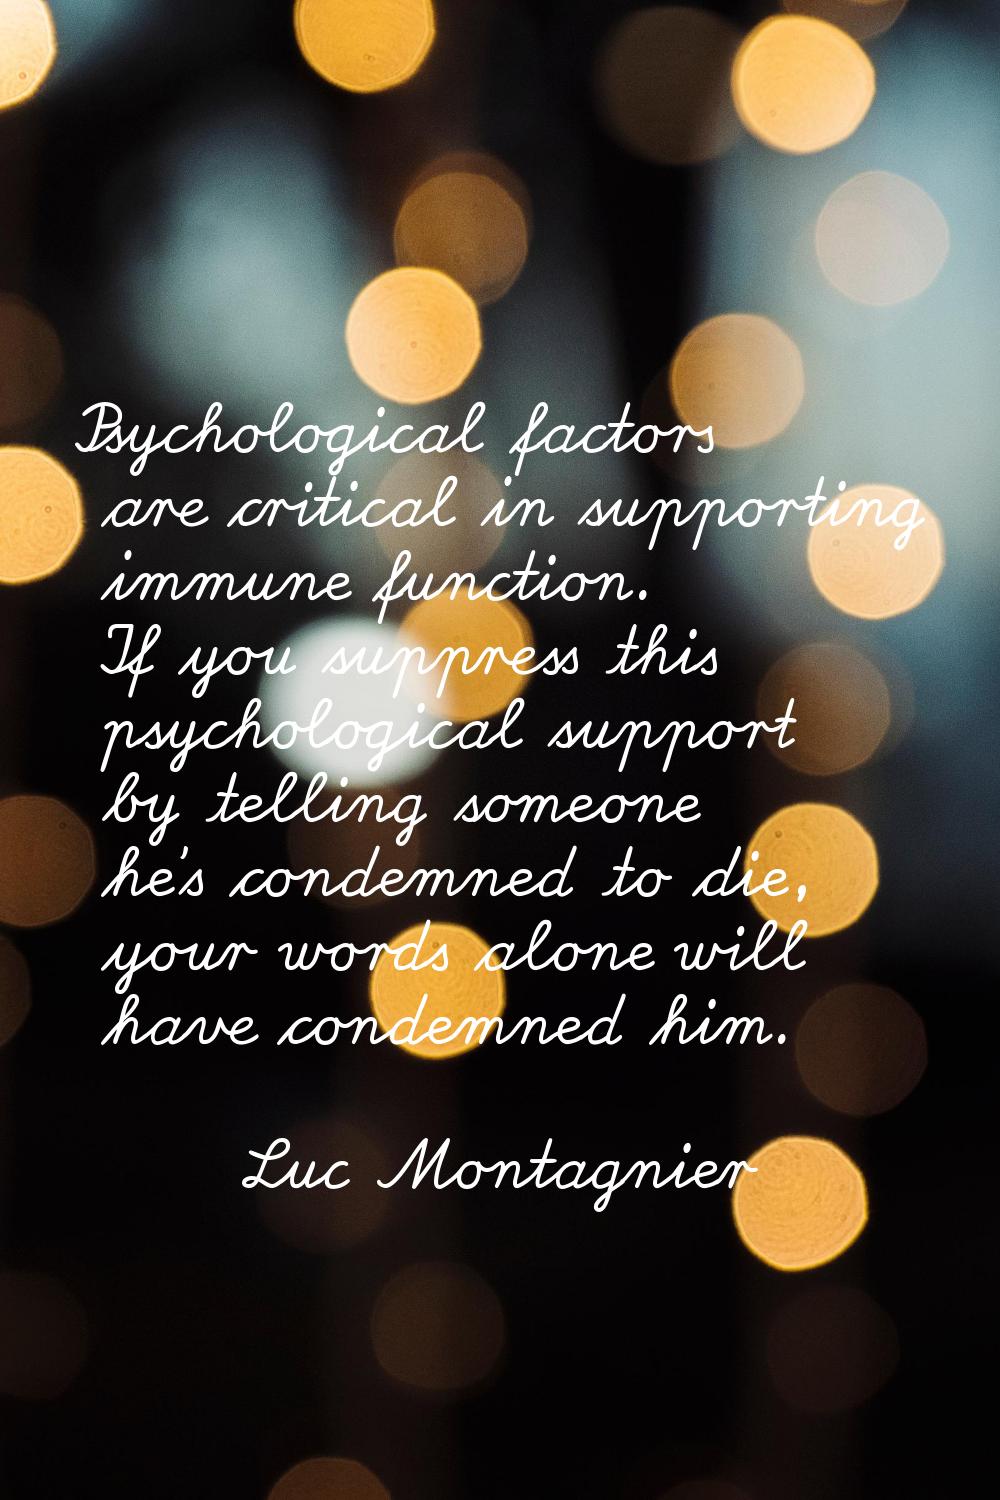 Psychological factors are critical in supporting immune function. If you suppress this psychologica